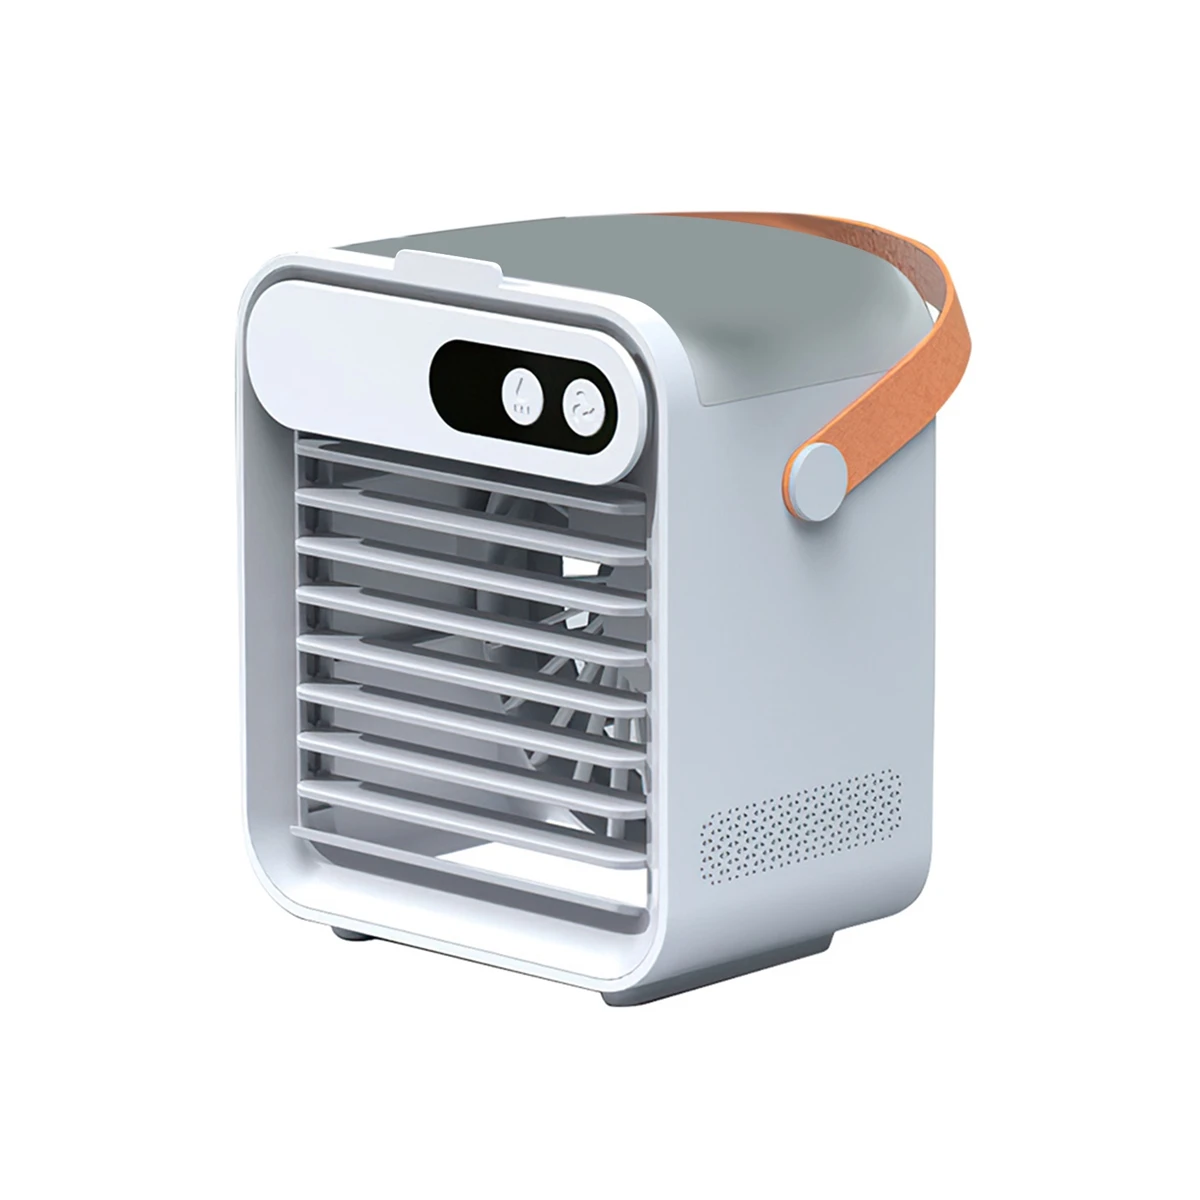 

Portable Air Conditioning Fan Mini Air Conditioner Purifier Humidifier Desktop USB Air Cooling Fan Air Cooler(White)